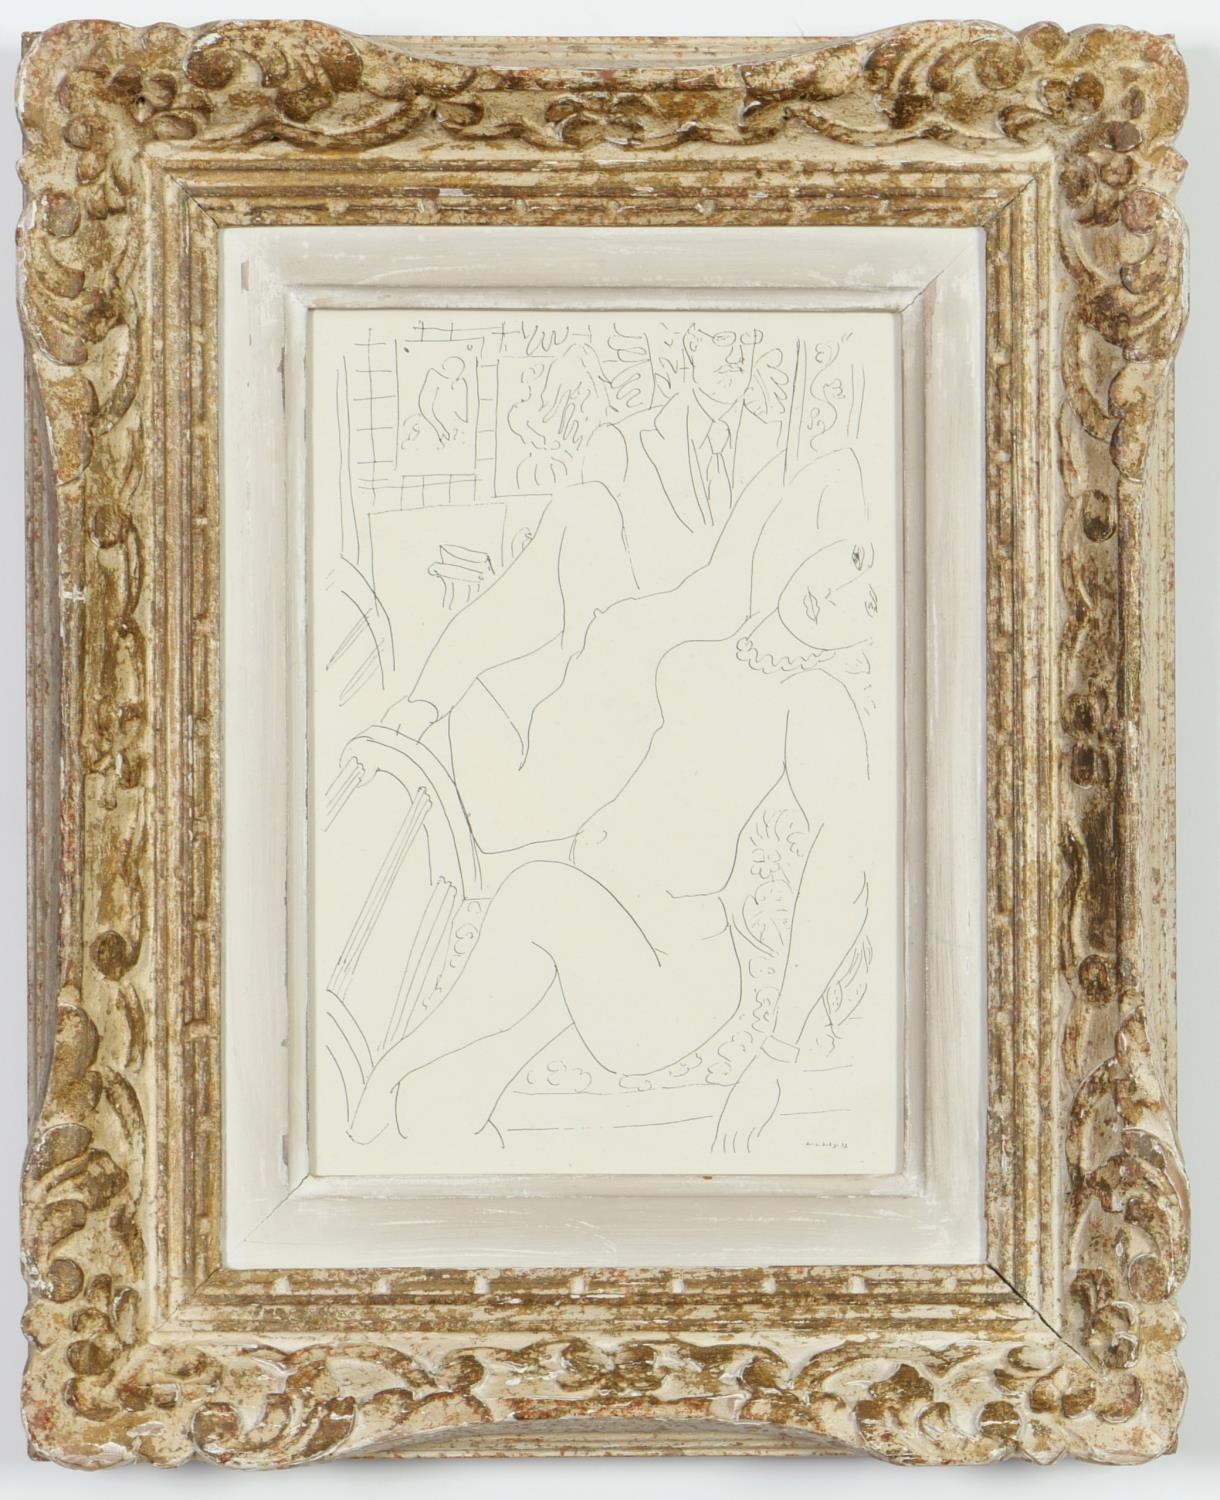 HENRI MATISSE, reclining woman with necklace, heliogravure, French Montparnasse frame, 26cm x 21cm.